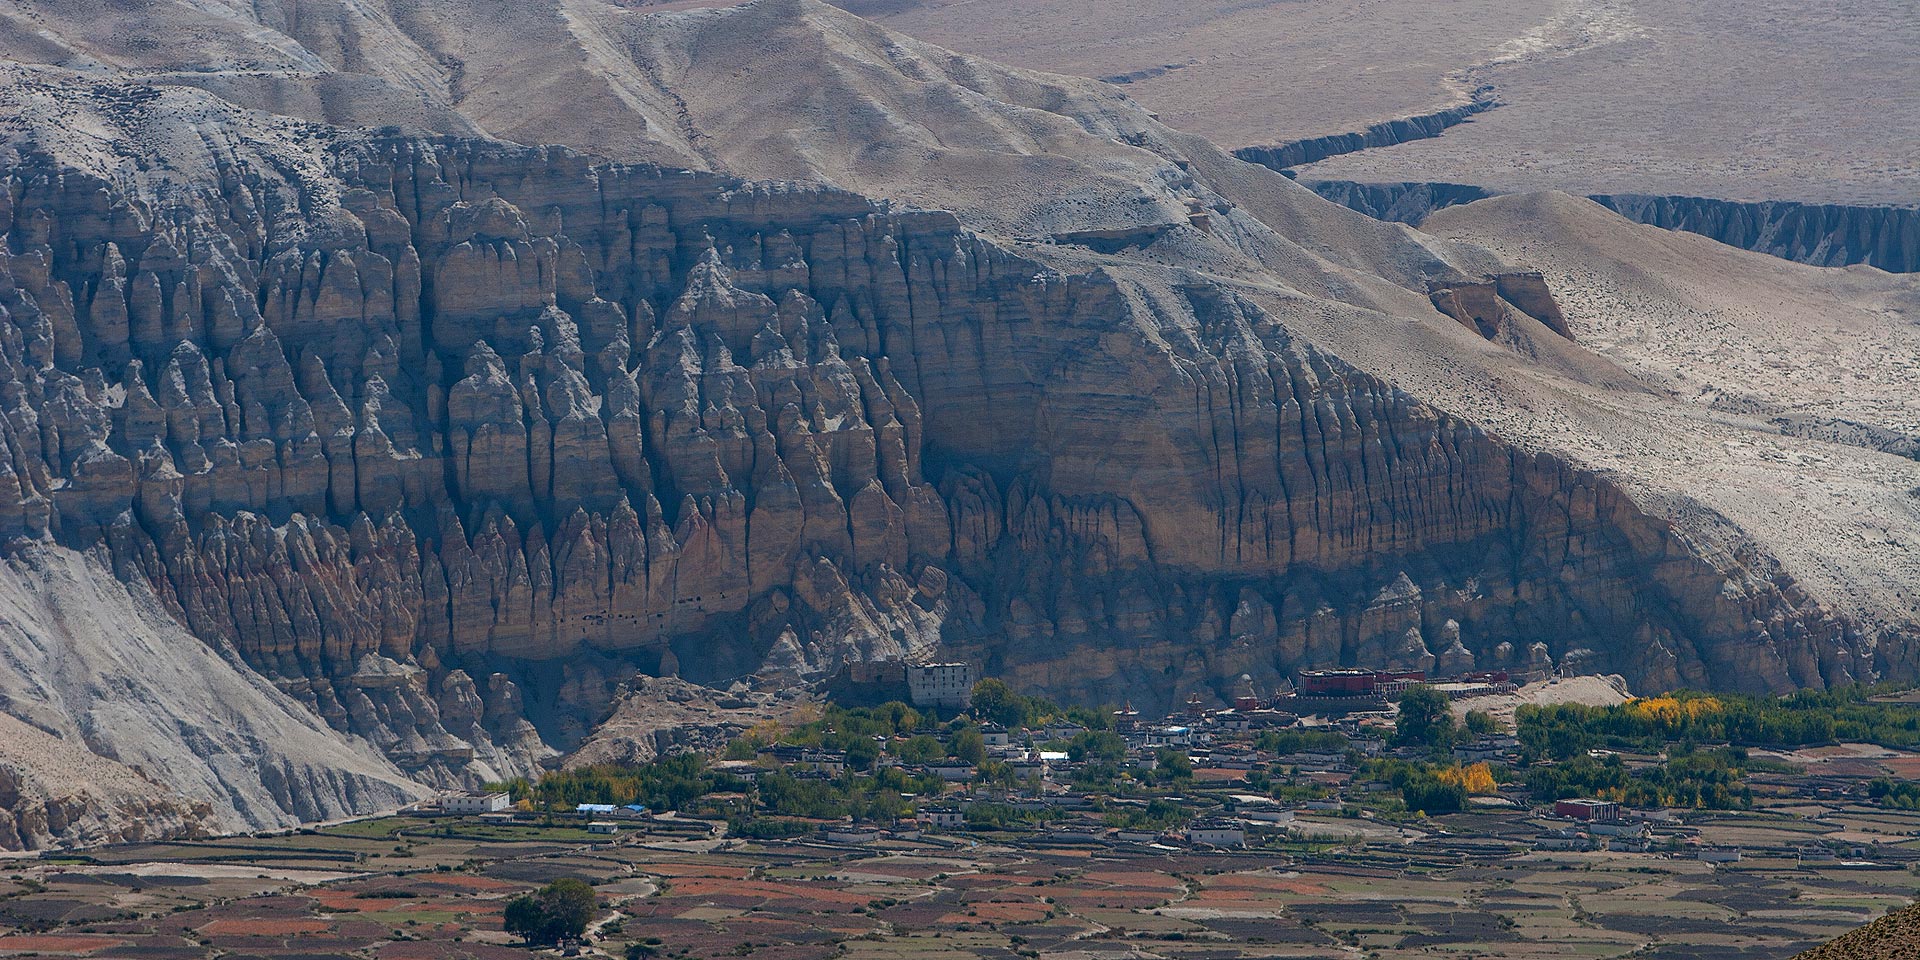 View down to Tsarang from the Lo Gekar trail in the Upper Mustang region of Nepal